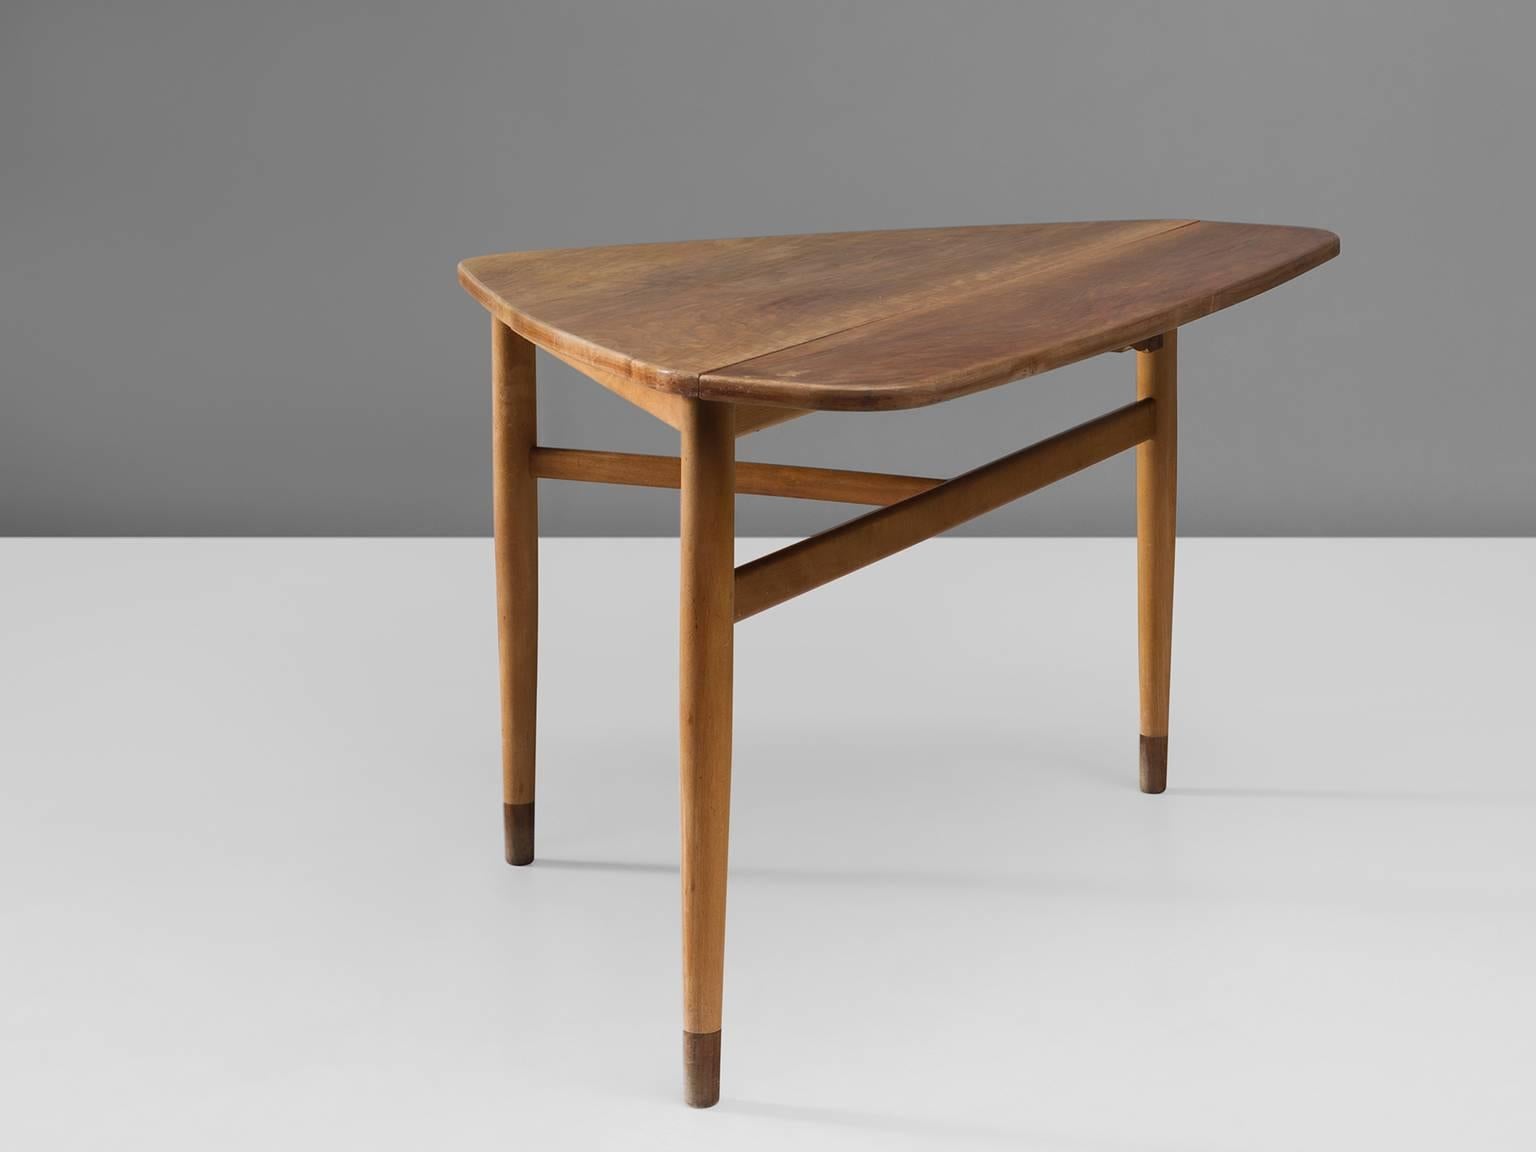 Cocktail table, walnut, teak and beech, attributed to Arne Vodder, Denmark 1950s. 

This triangular coffee table with legs of beech and shoes of teak. The table has three legs that are connected with beech slats that form a T. The table is unique